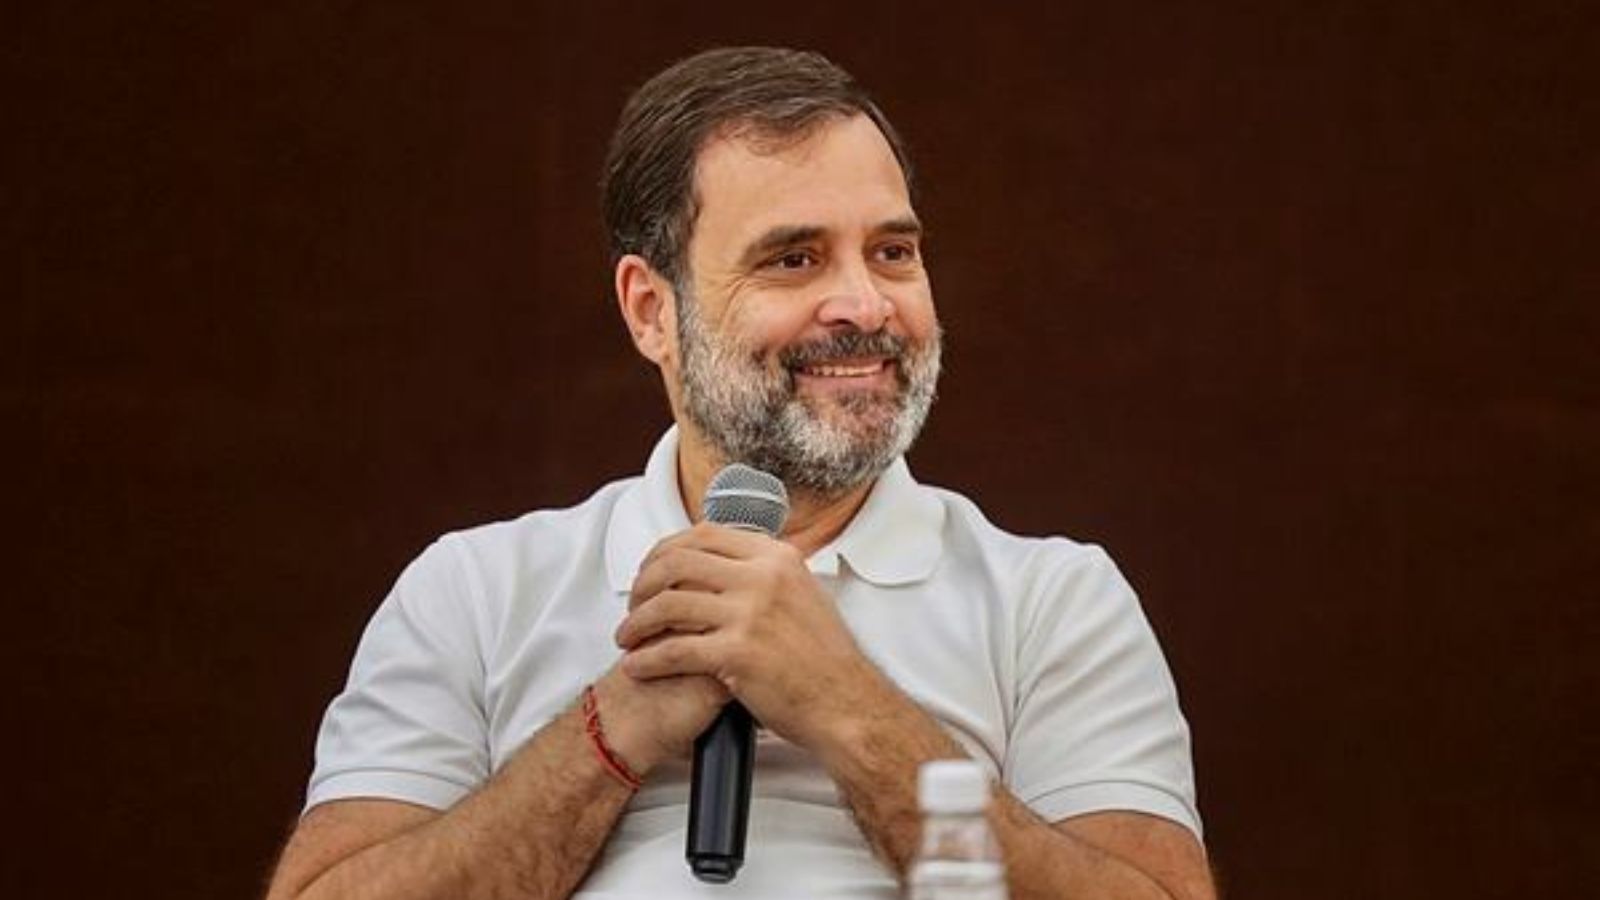 Rahul Gandhi summoned to appear in UP court on Jan 6 over remarks against Amit Shah | Lucknow News